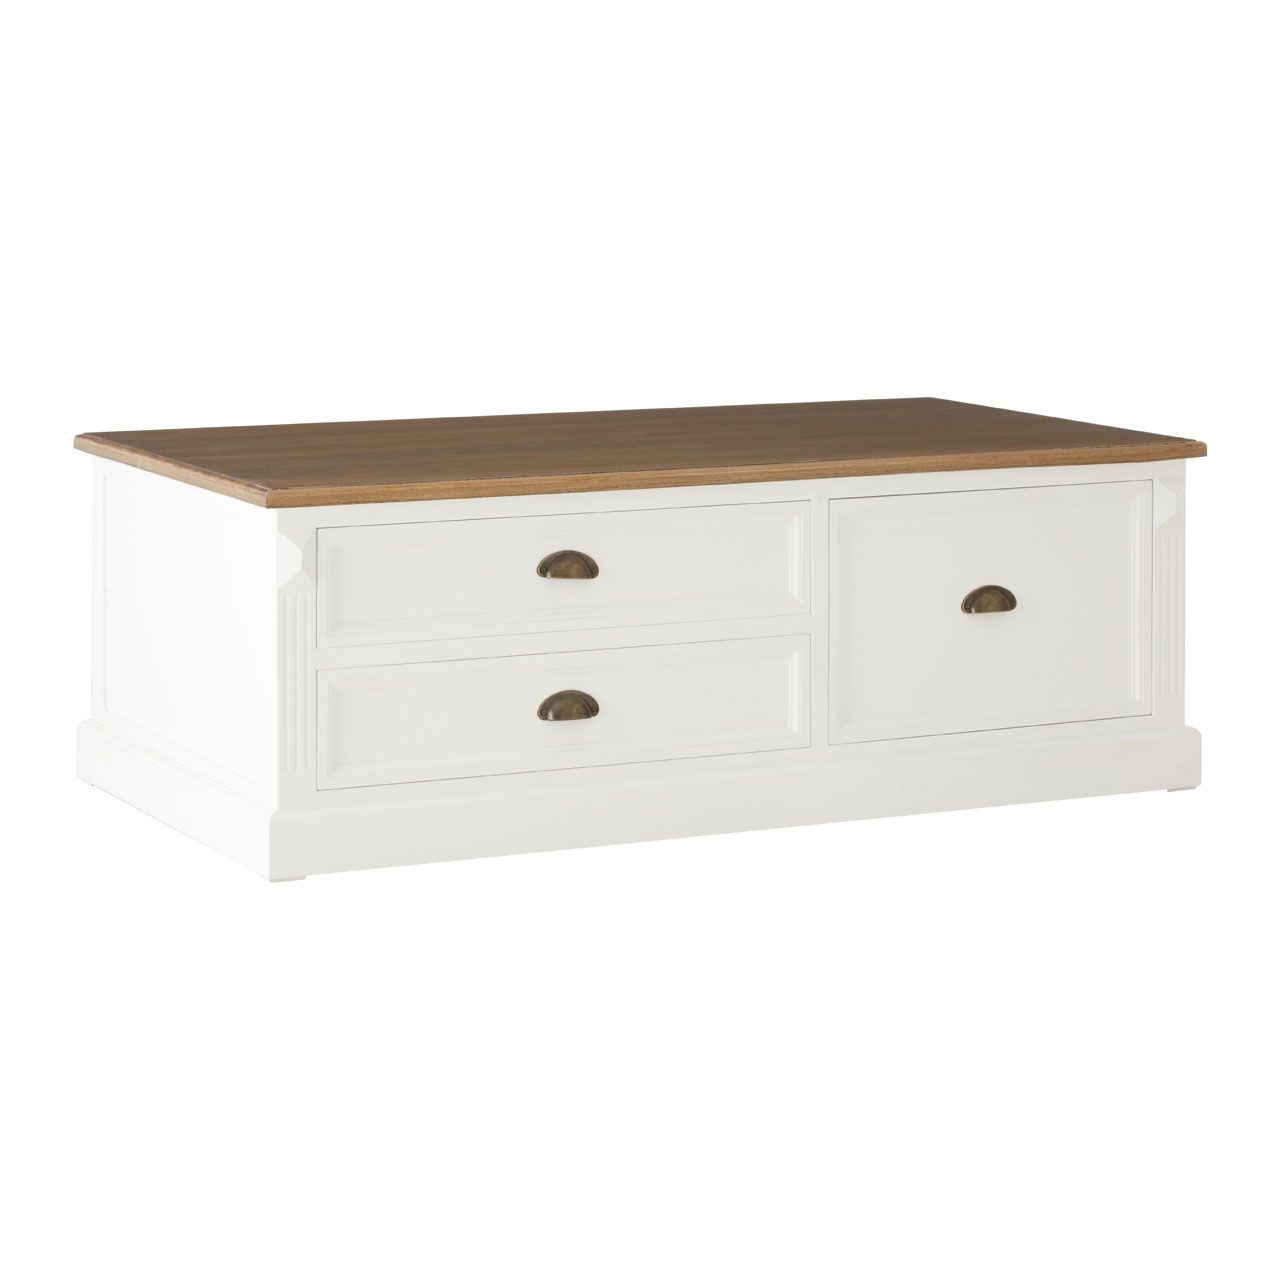 Hardwick Low Wooden Coffee Table In White With 3 Drawers